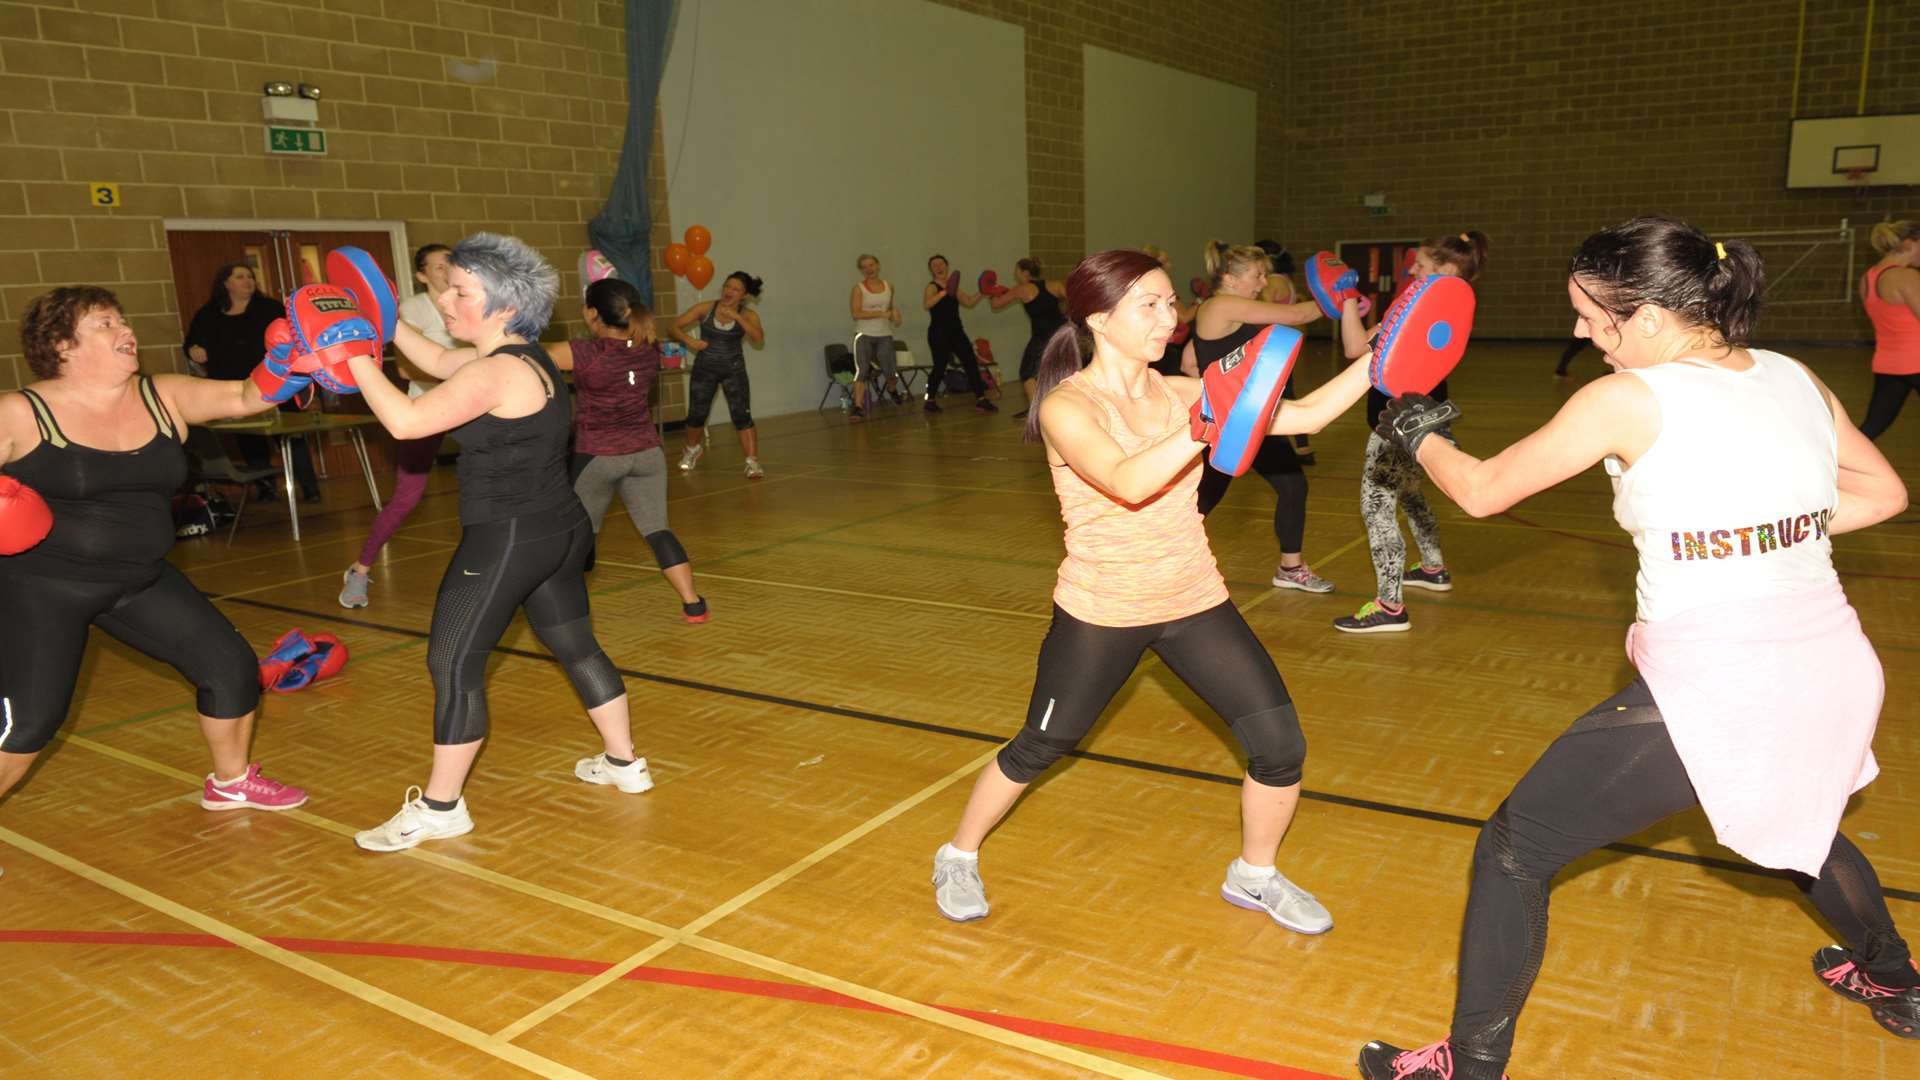 Aerobics4Stace at Cygnets Leisure Centre